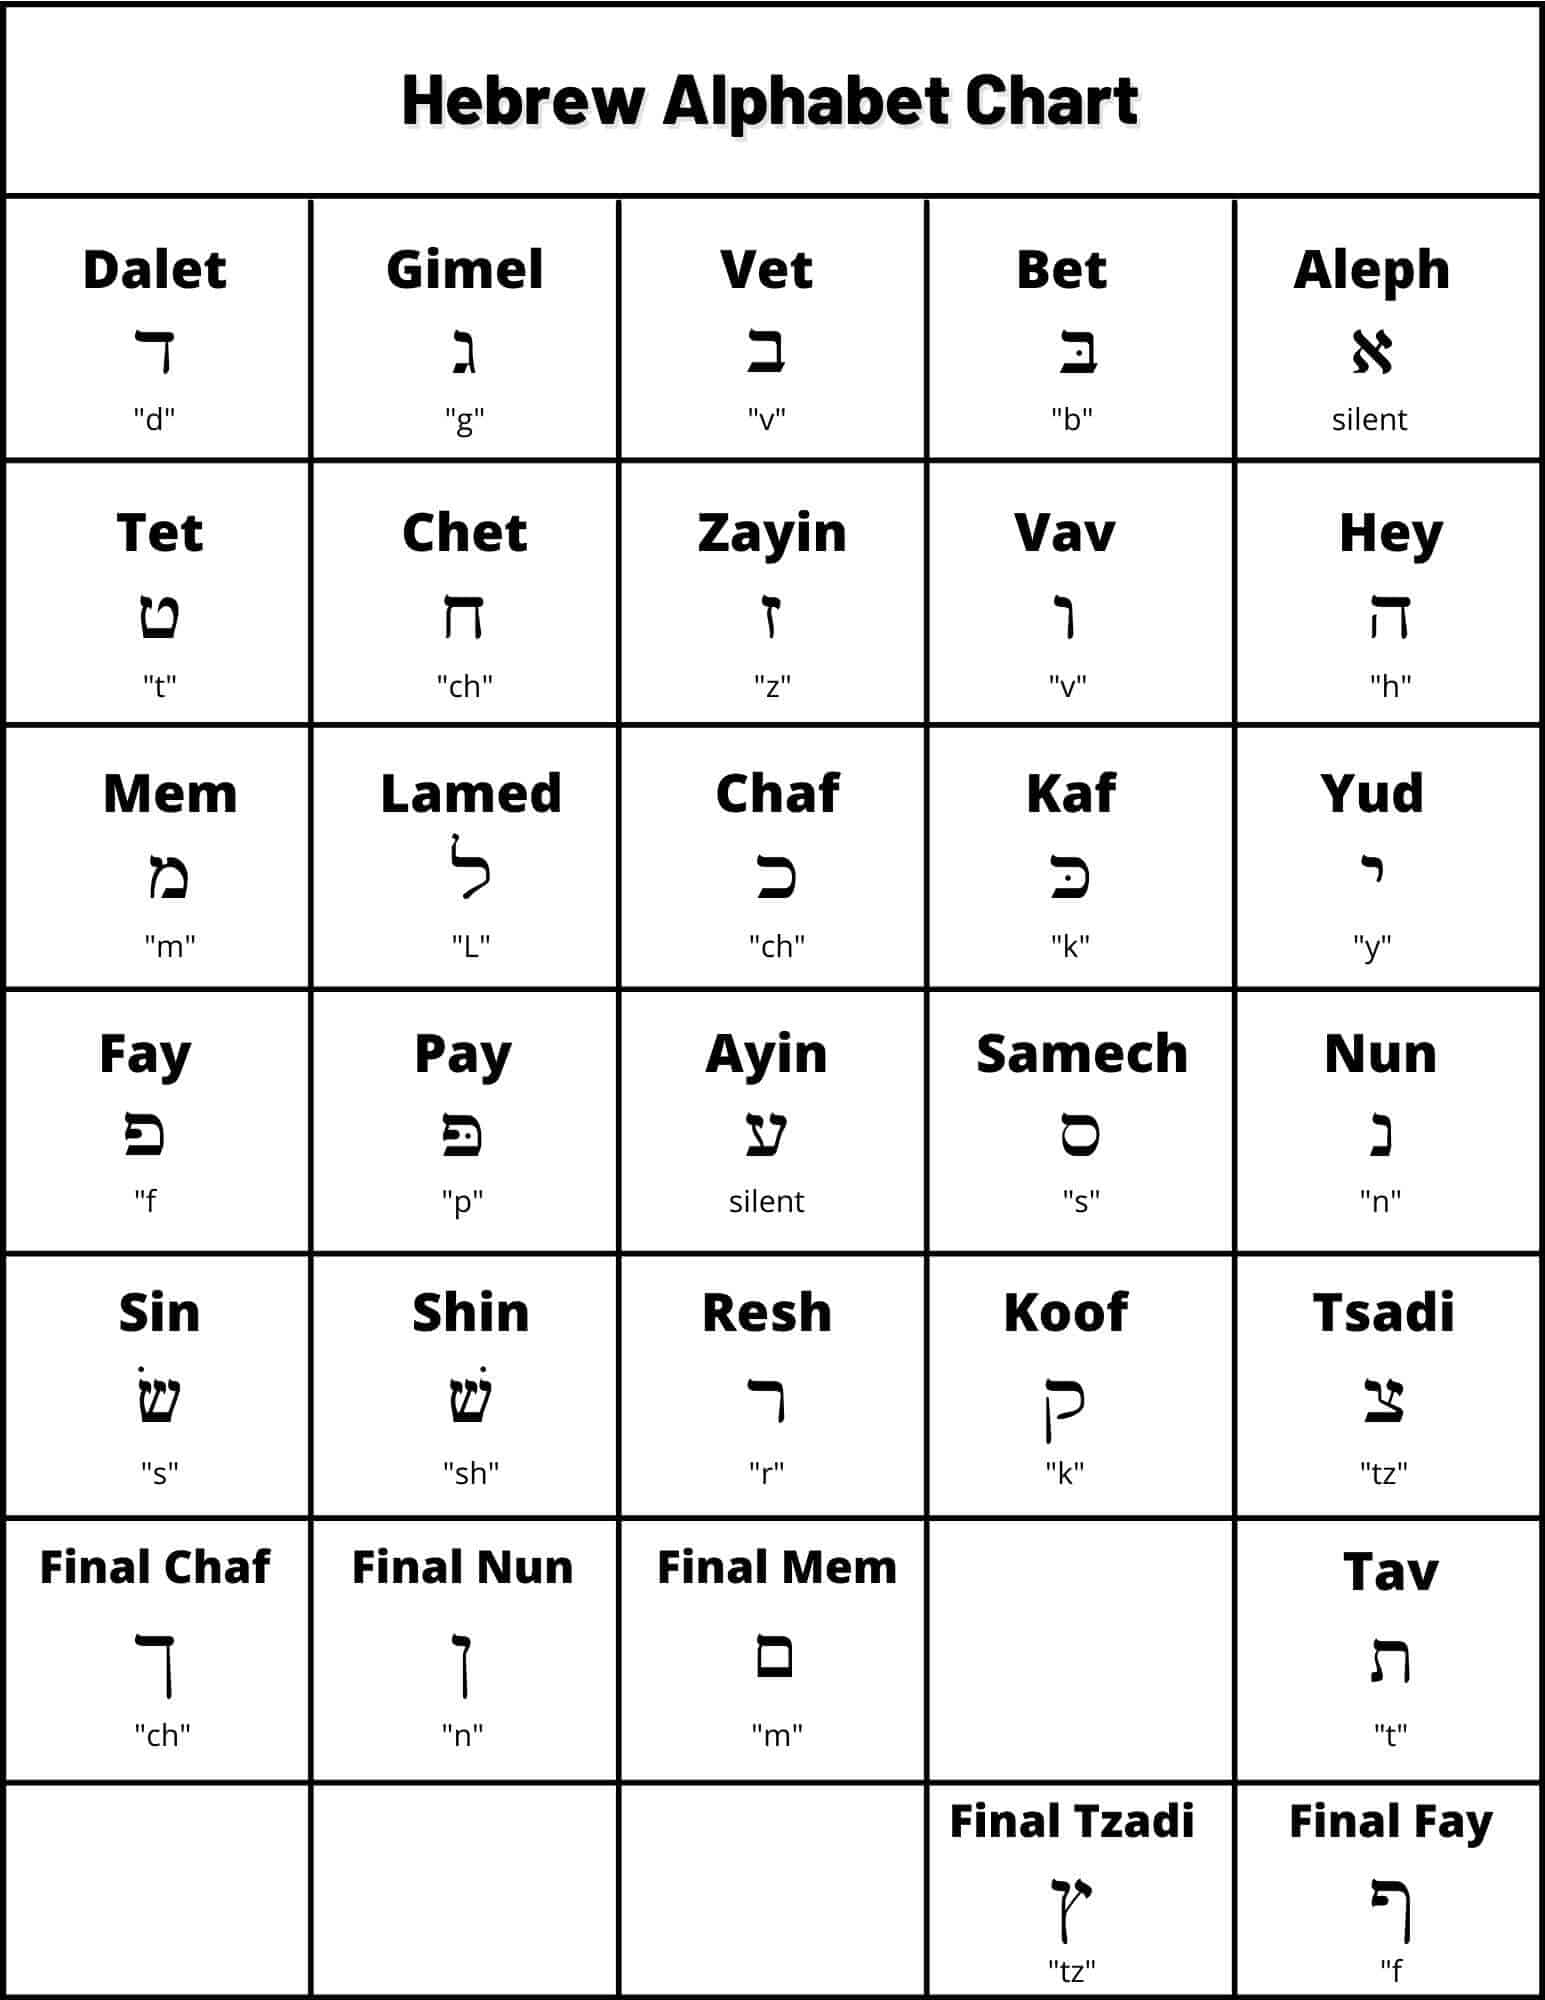 Hebrew Alphabet Chart Learn Each of the Hebrew Letters B'nai Mitzvah